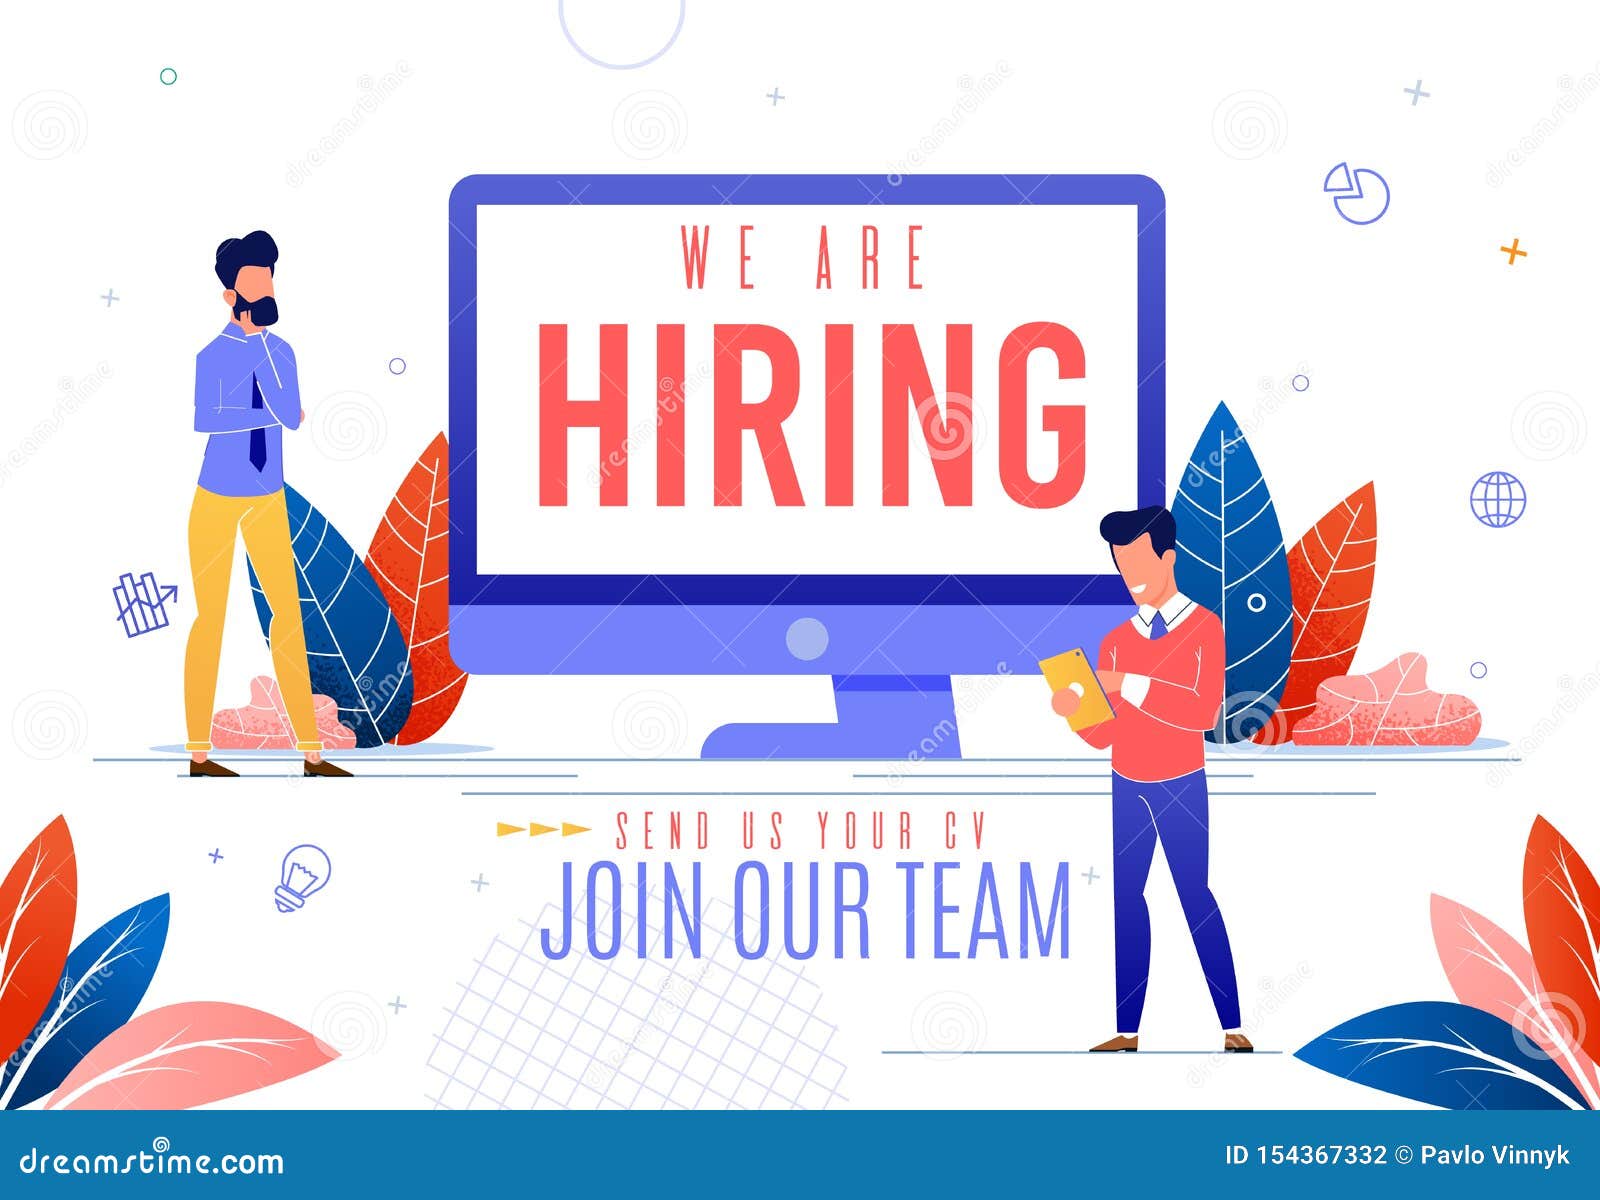 Poster We Are Hiring Send Us Youa Join Our Team Stock Vector